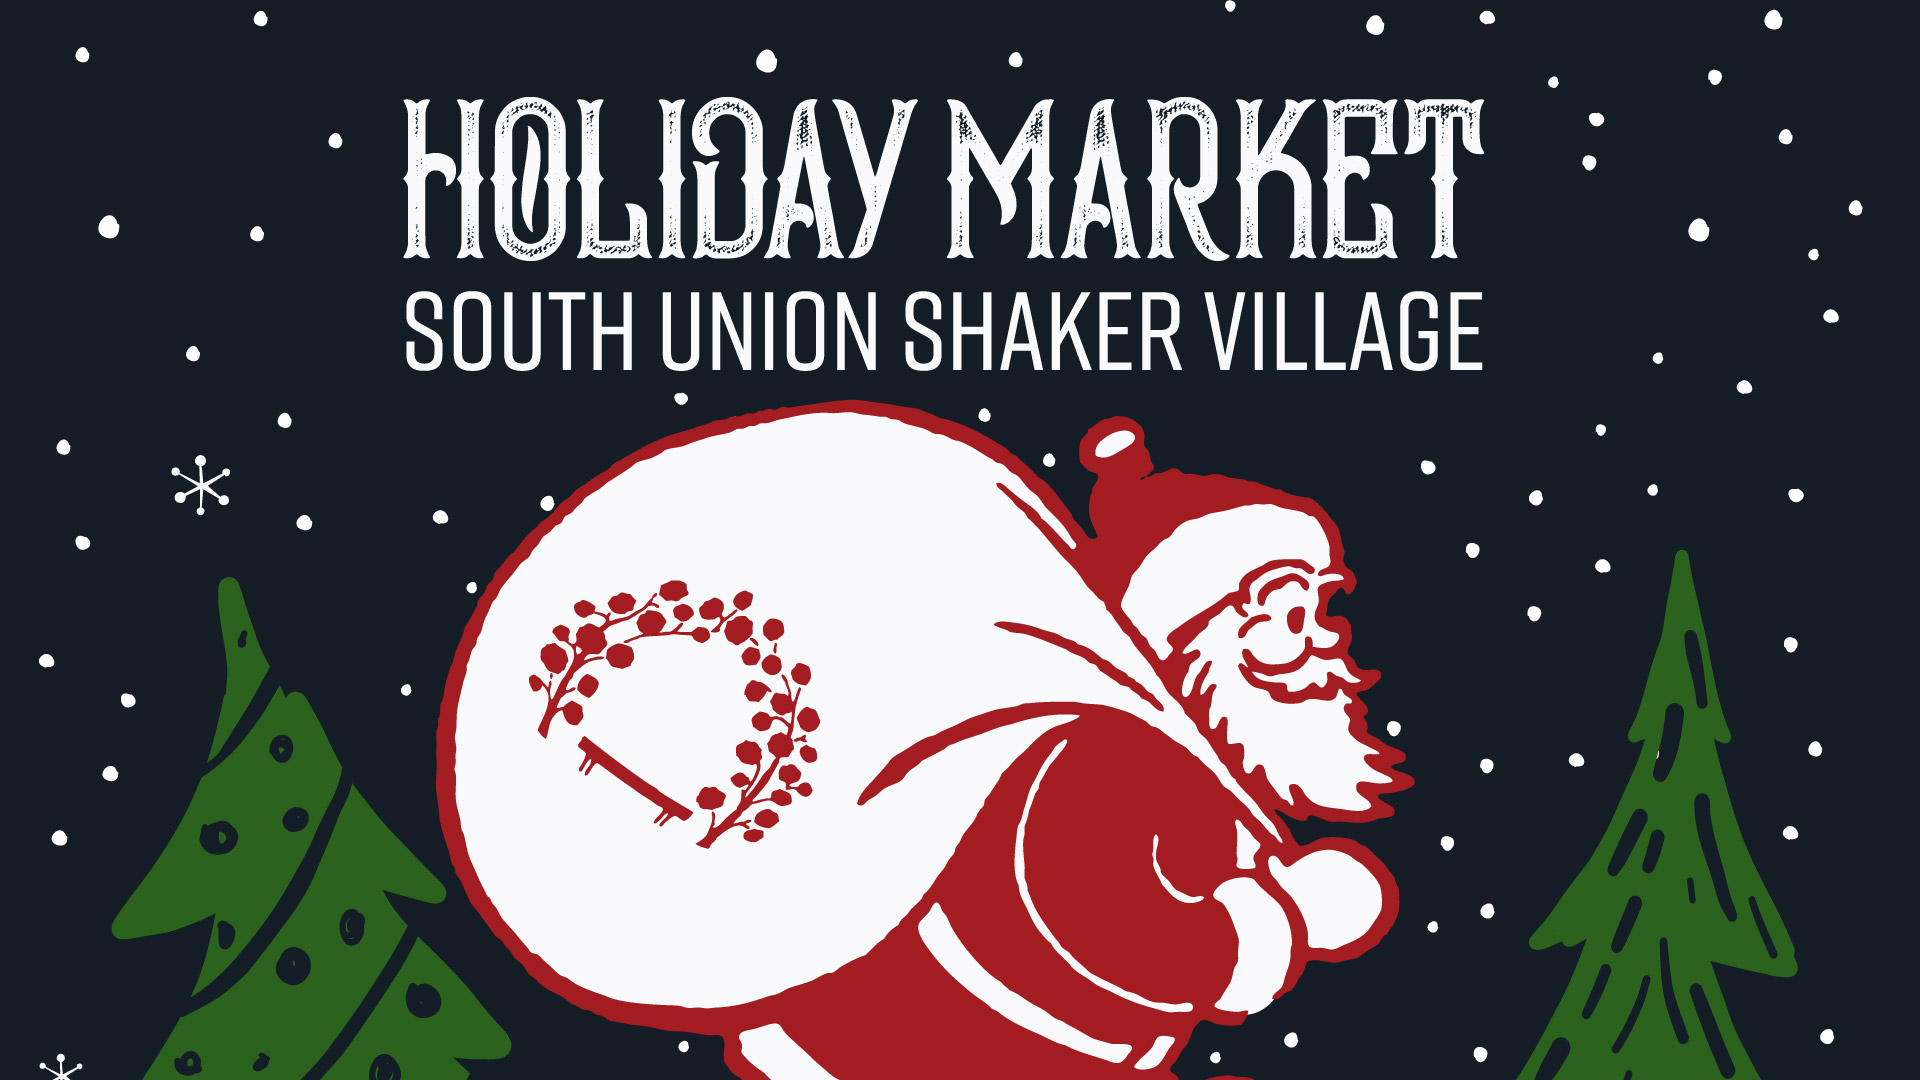 HOLIDAY MARKET / CANCELLED SOUTH UNION SHAKER VILLAGE